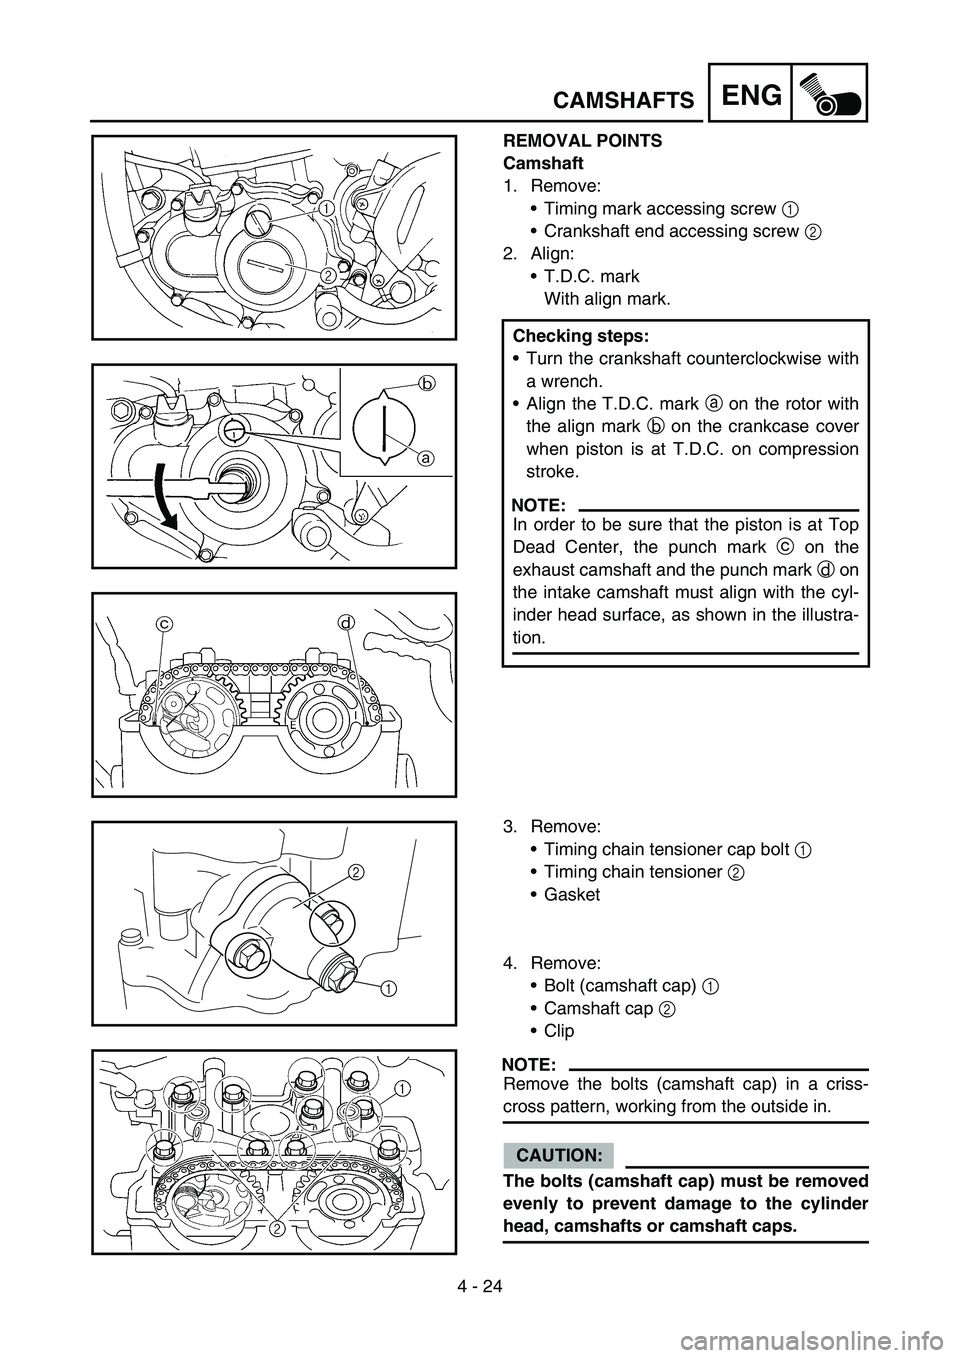 YAMAHA YZ250F 2006  Owners Manual 4 - 24
ENGCAMSHAFTS
REMOVAL POINTS
Camshaft
1. Remove:
Timing mark accessing screw 1 
Crankshaft end accessing screw 2 
2. Align:
T.D.C. mark
With align mark.
Checking steps:
Turn the crankshaft c